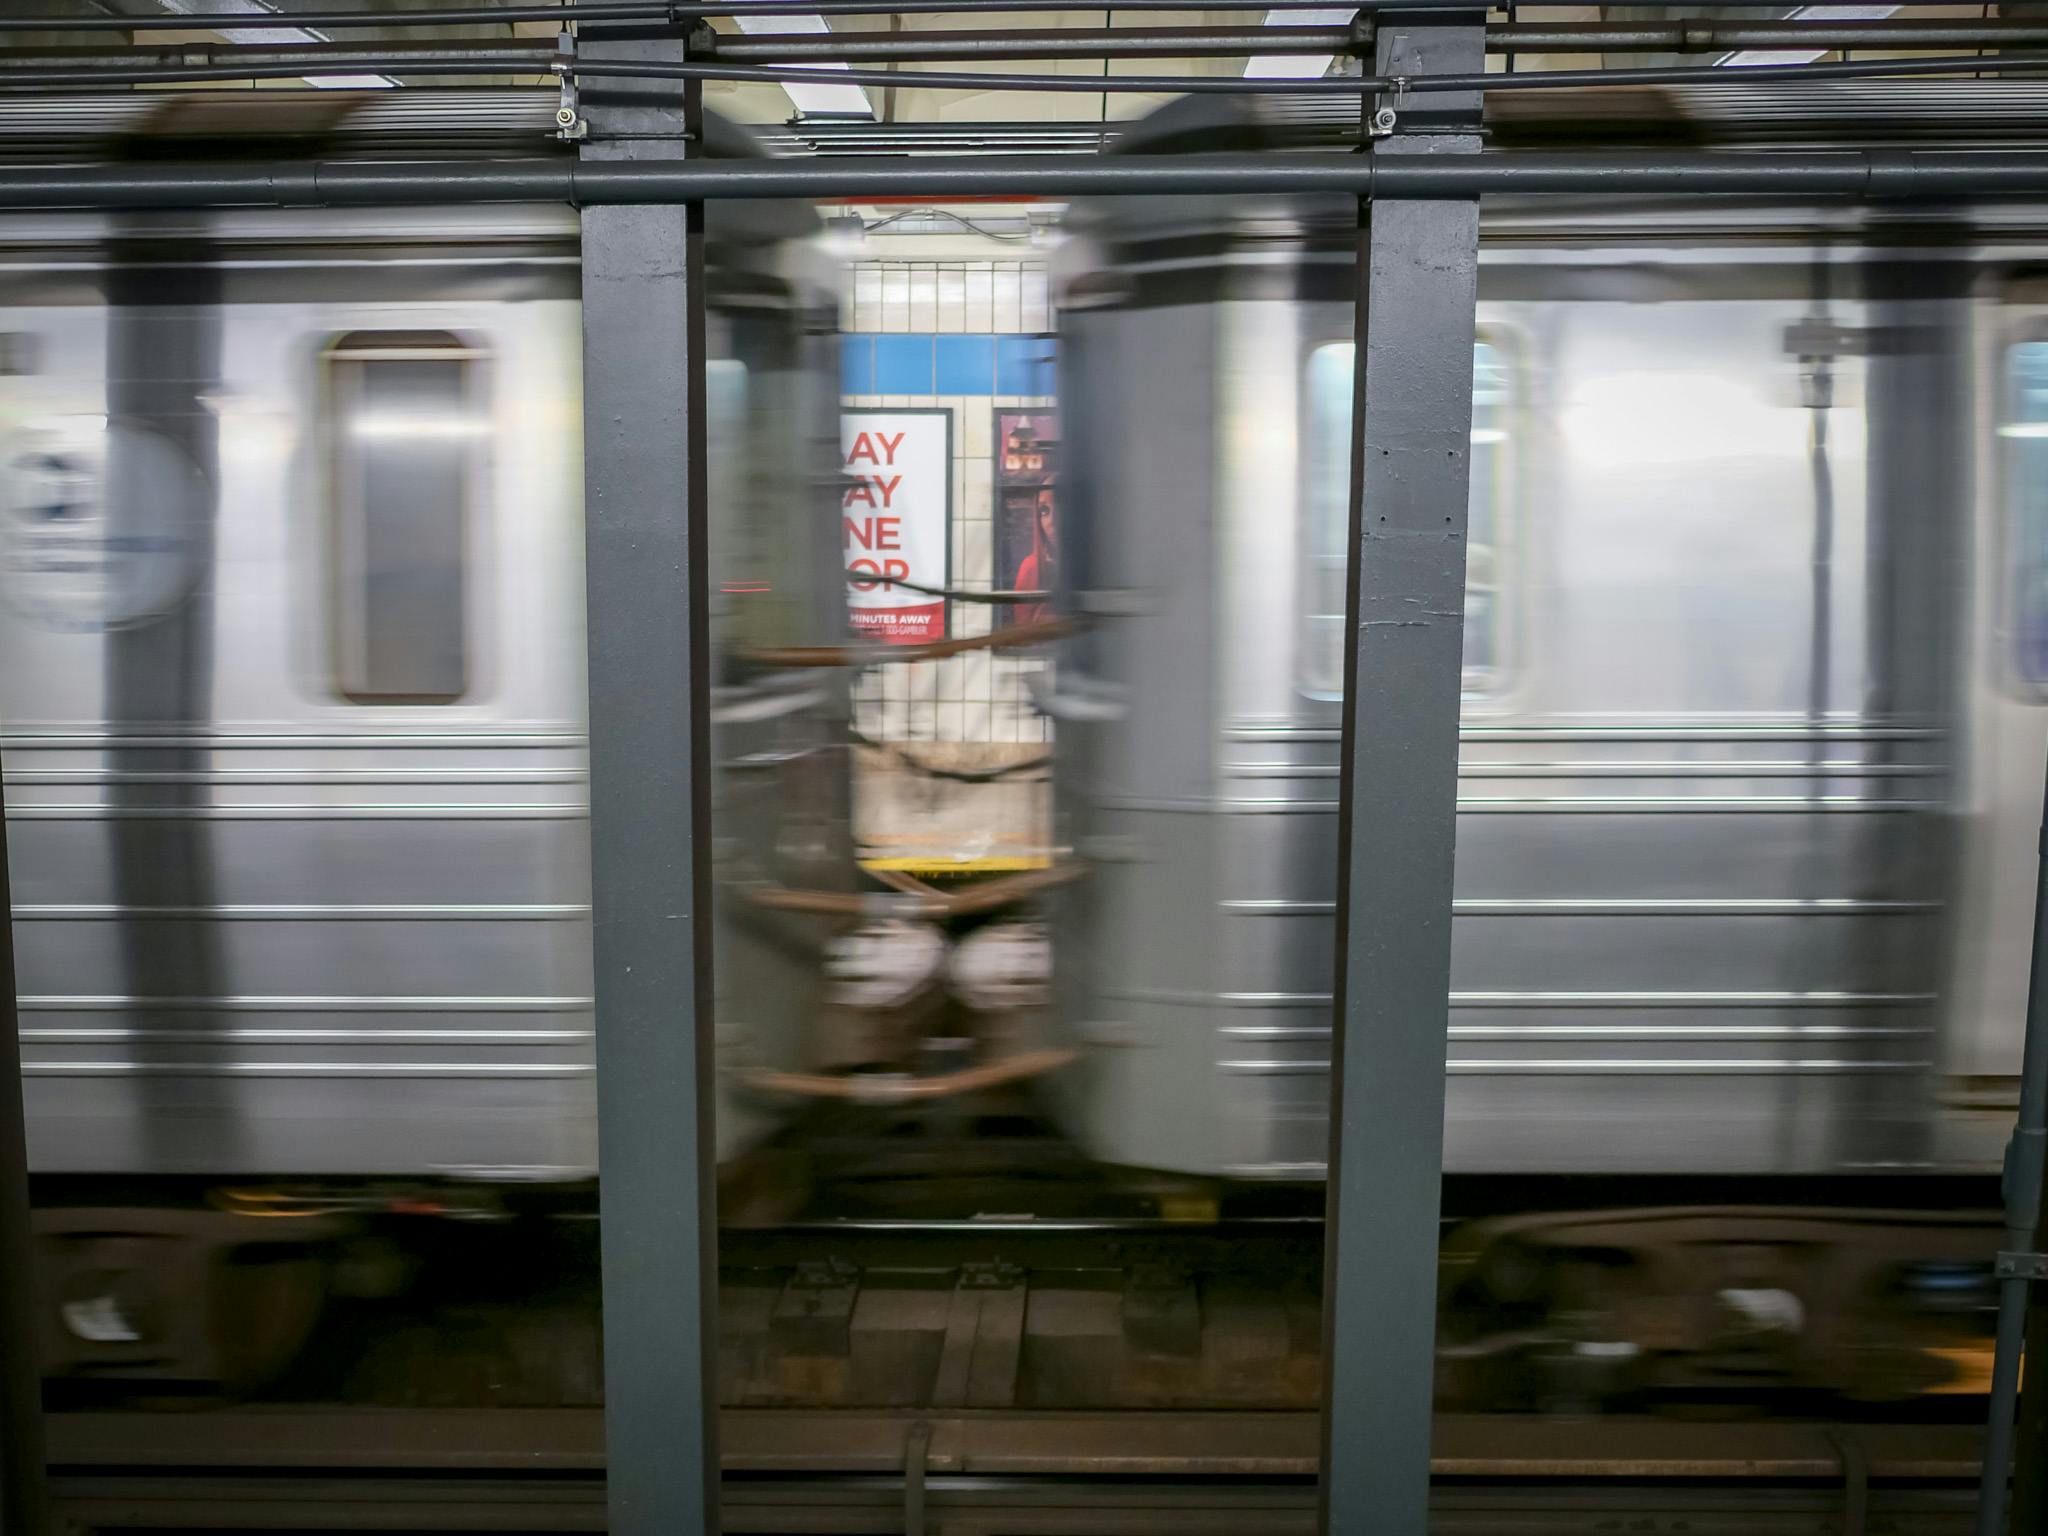 The NYC Metro coming into the station